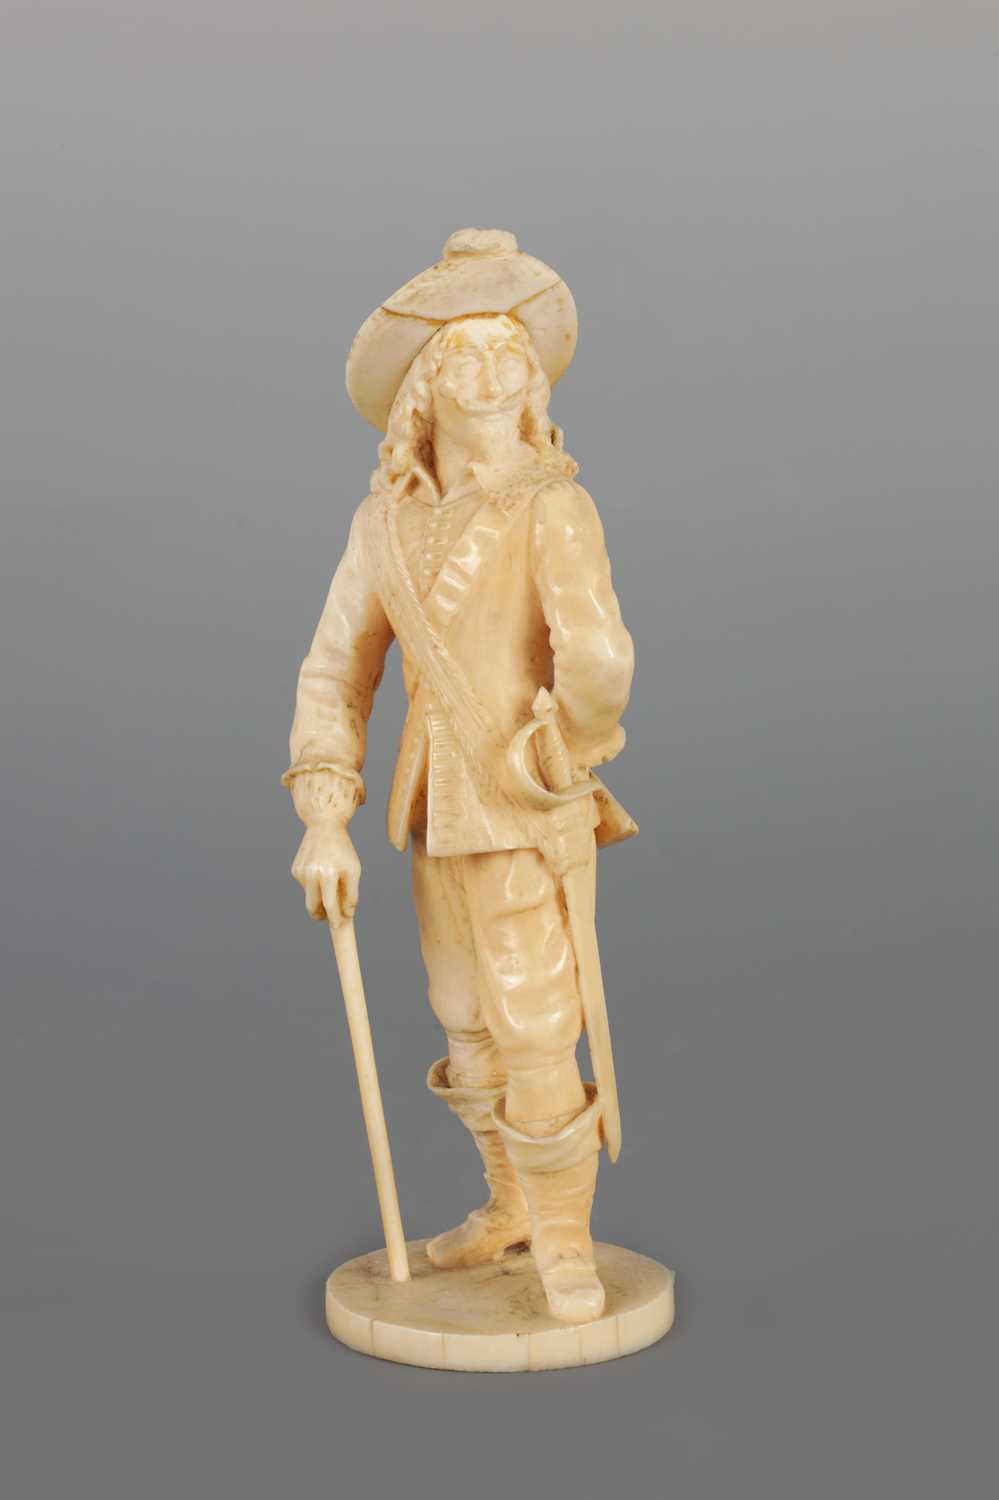 Lot 103 - AN IVORY DIEPPE CARVED FIGURE OF A CAVALIER